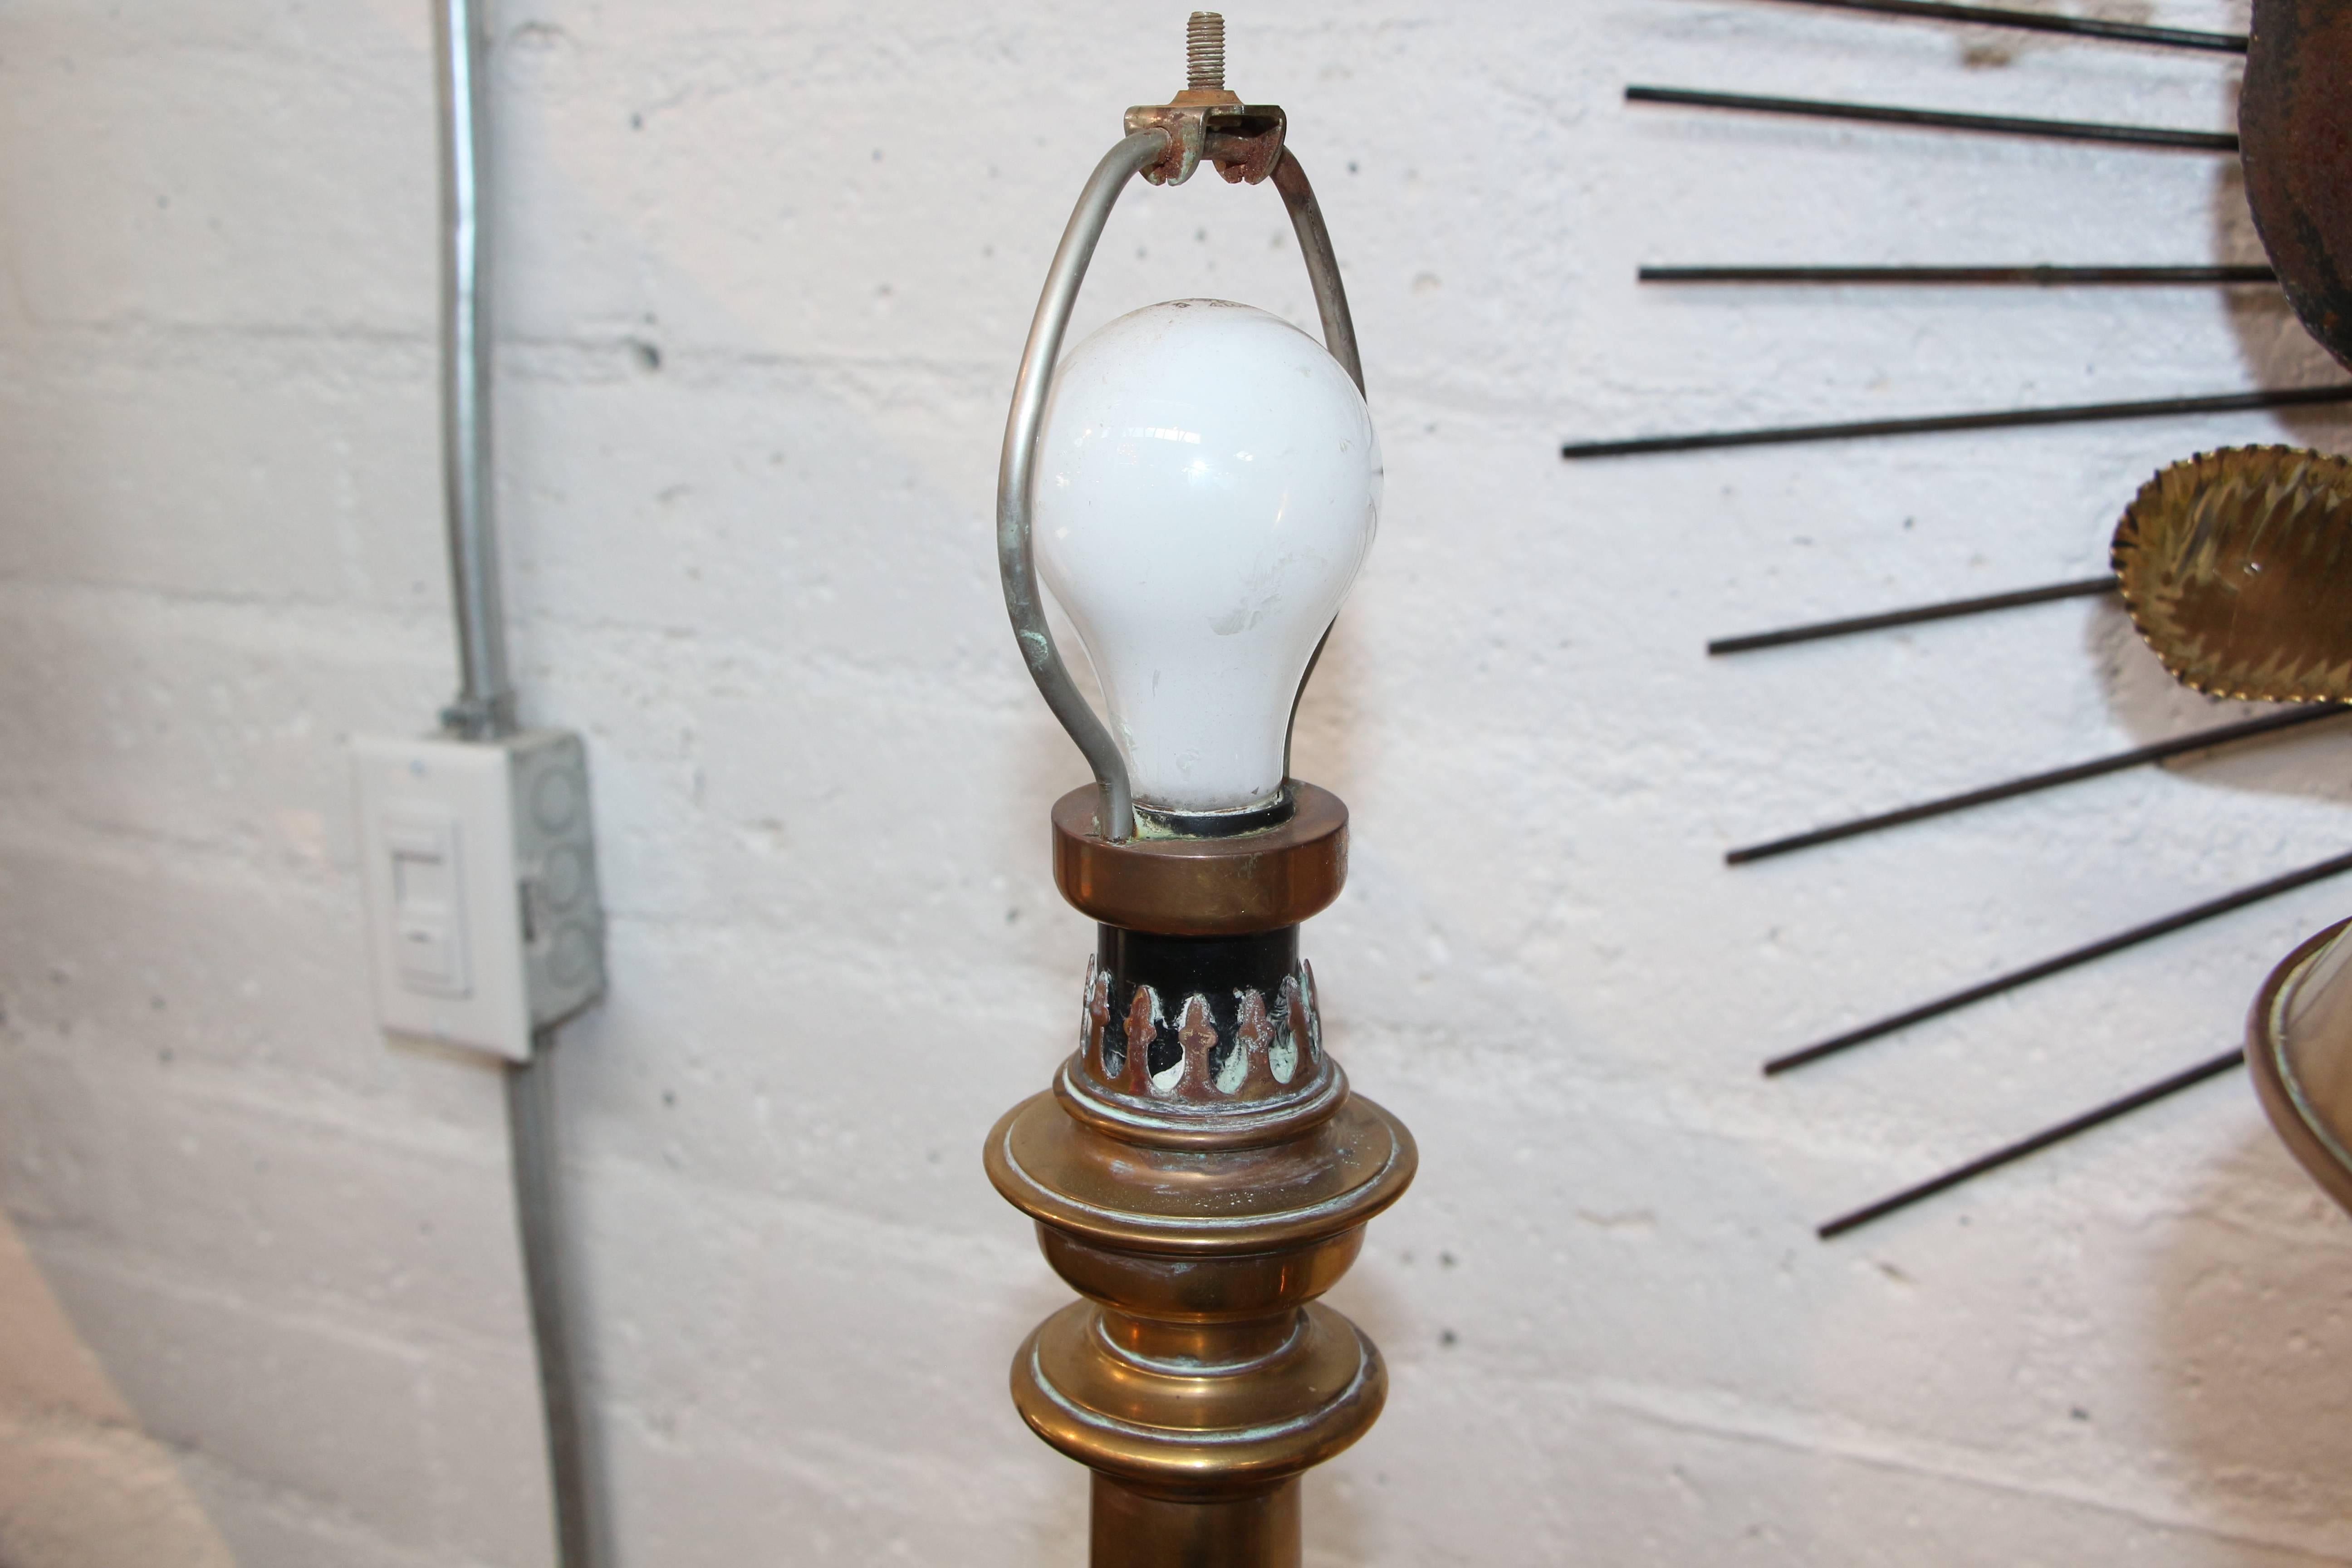 A pair of extremely well-made Chapman brass lamp with brass shades. These lamps are solid brass and quite heavy. They are extremely well-made. One has a label that reads Chapman 1983 stuck to a felt base. The other does not have any felt. There is